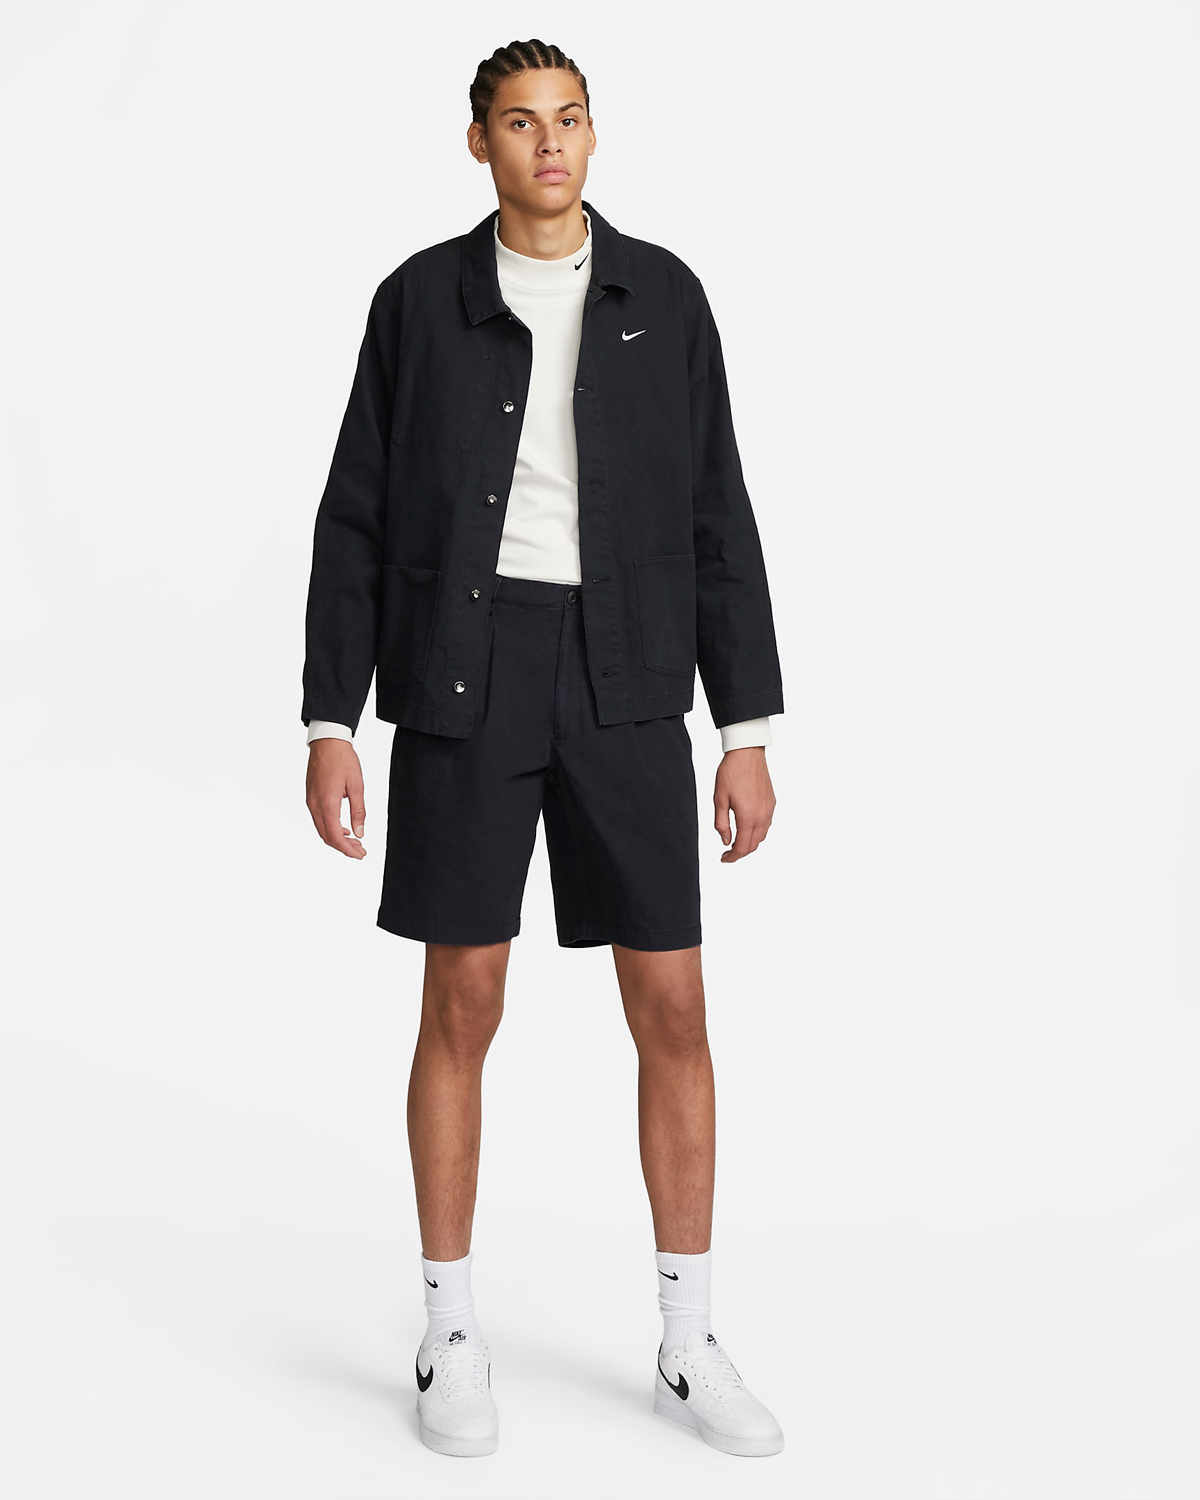 Nike-Life-Pleated-Chino-Shorts-Black-Outfit